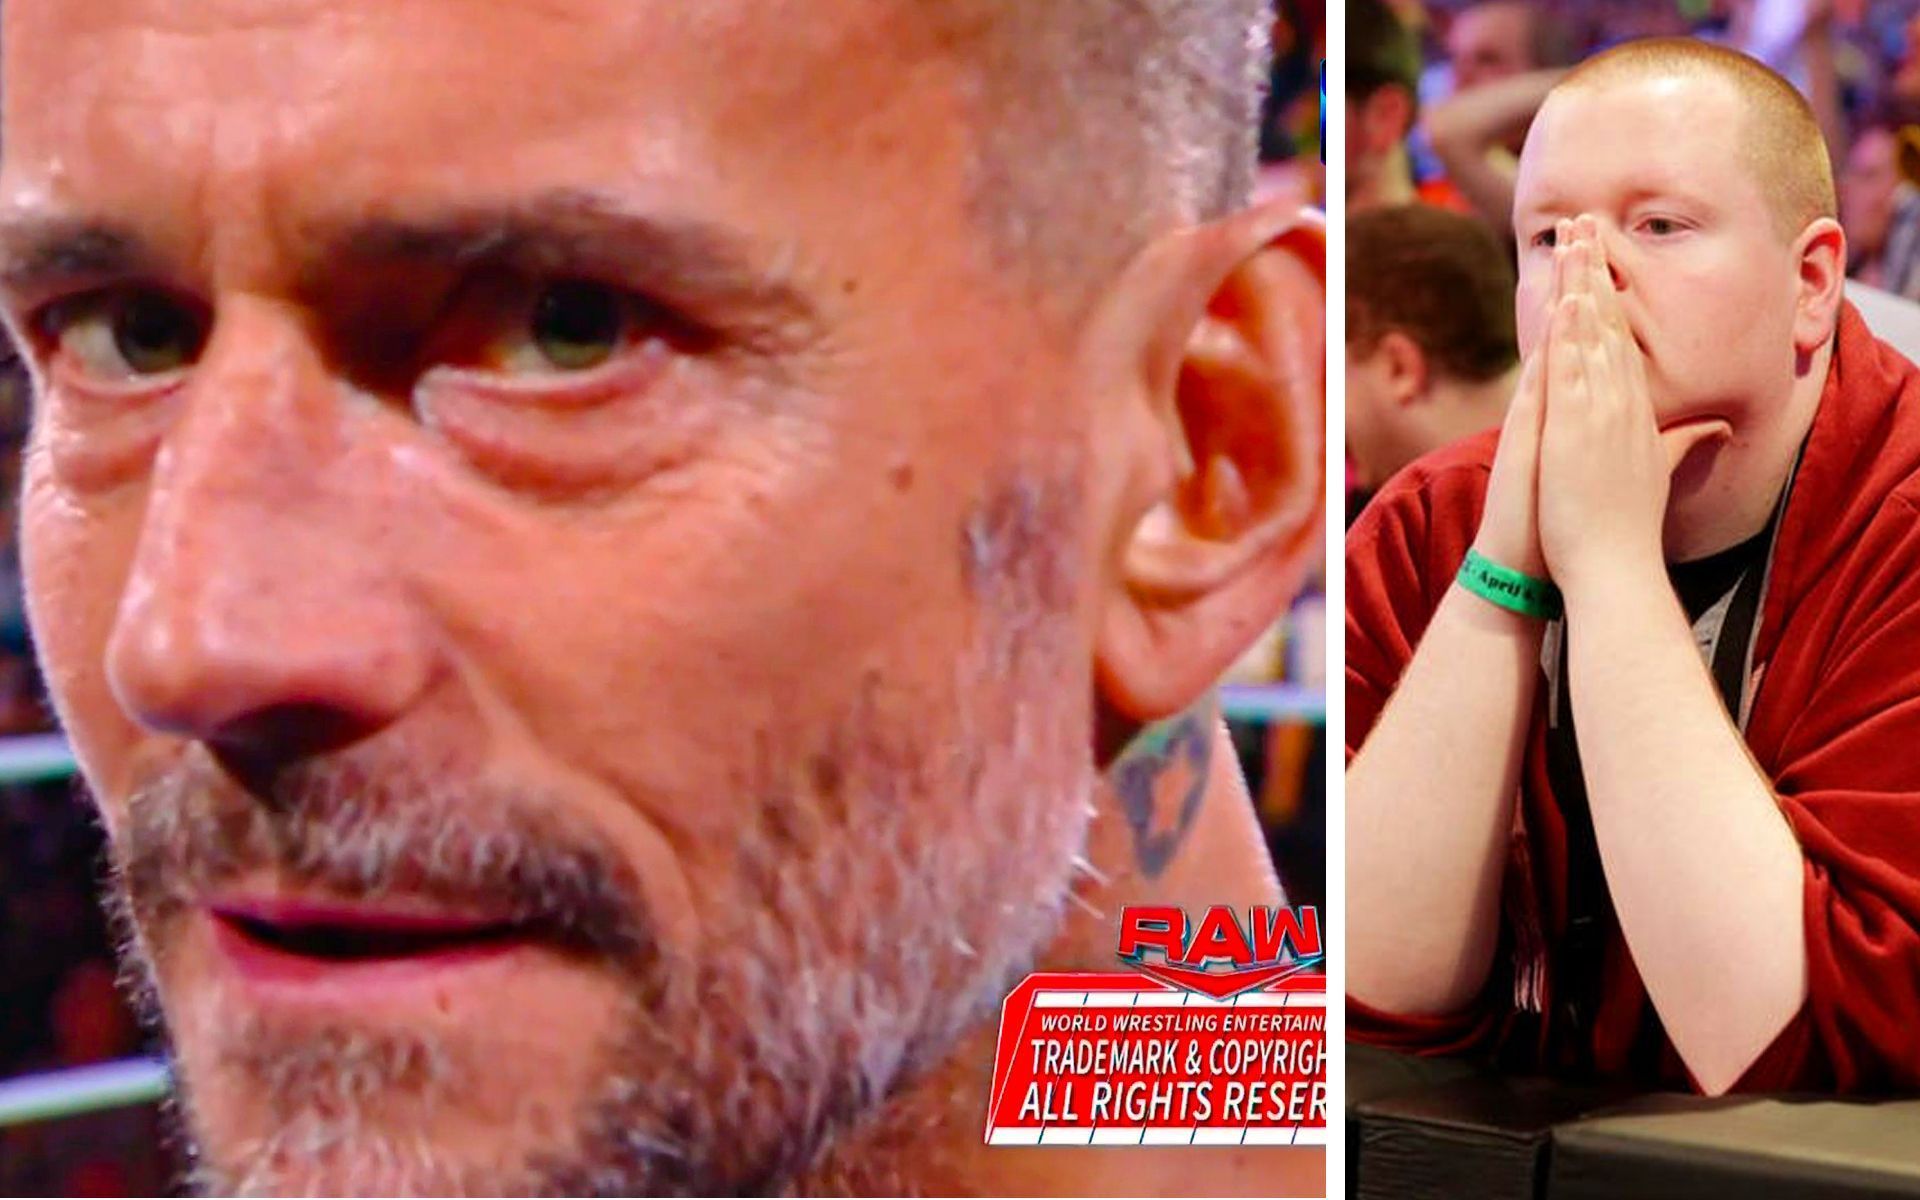 CM Punk cut his first promo almost after a decade on the recent episode of WWE RAW.